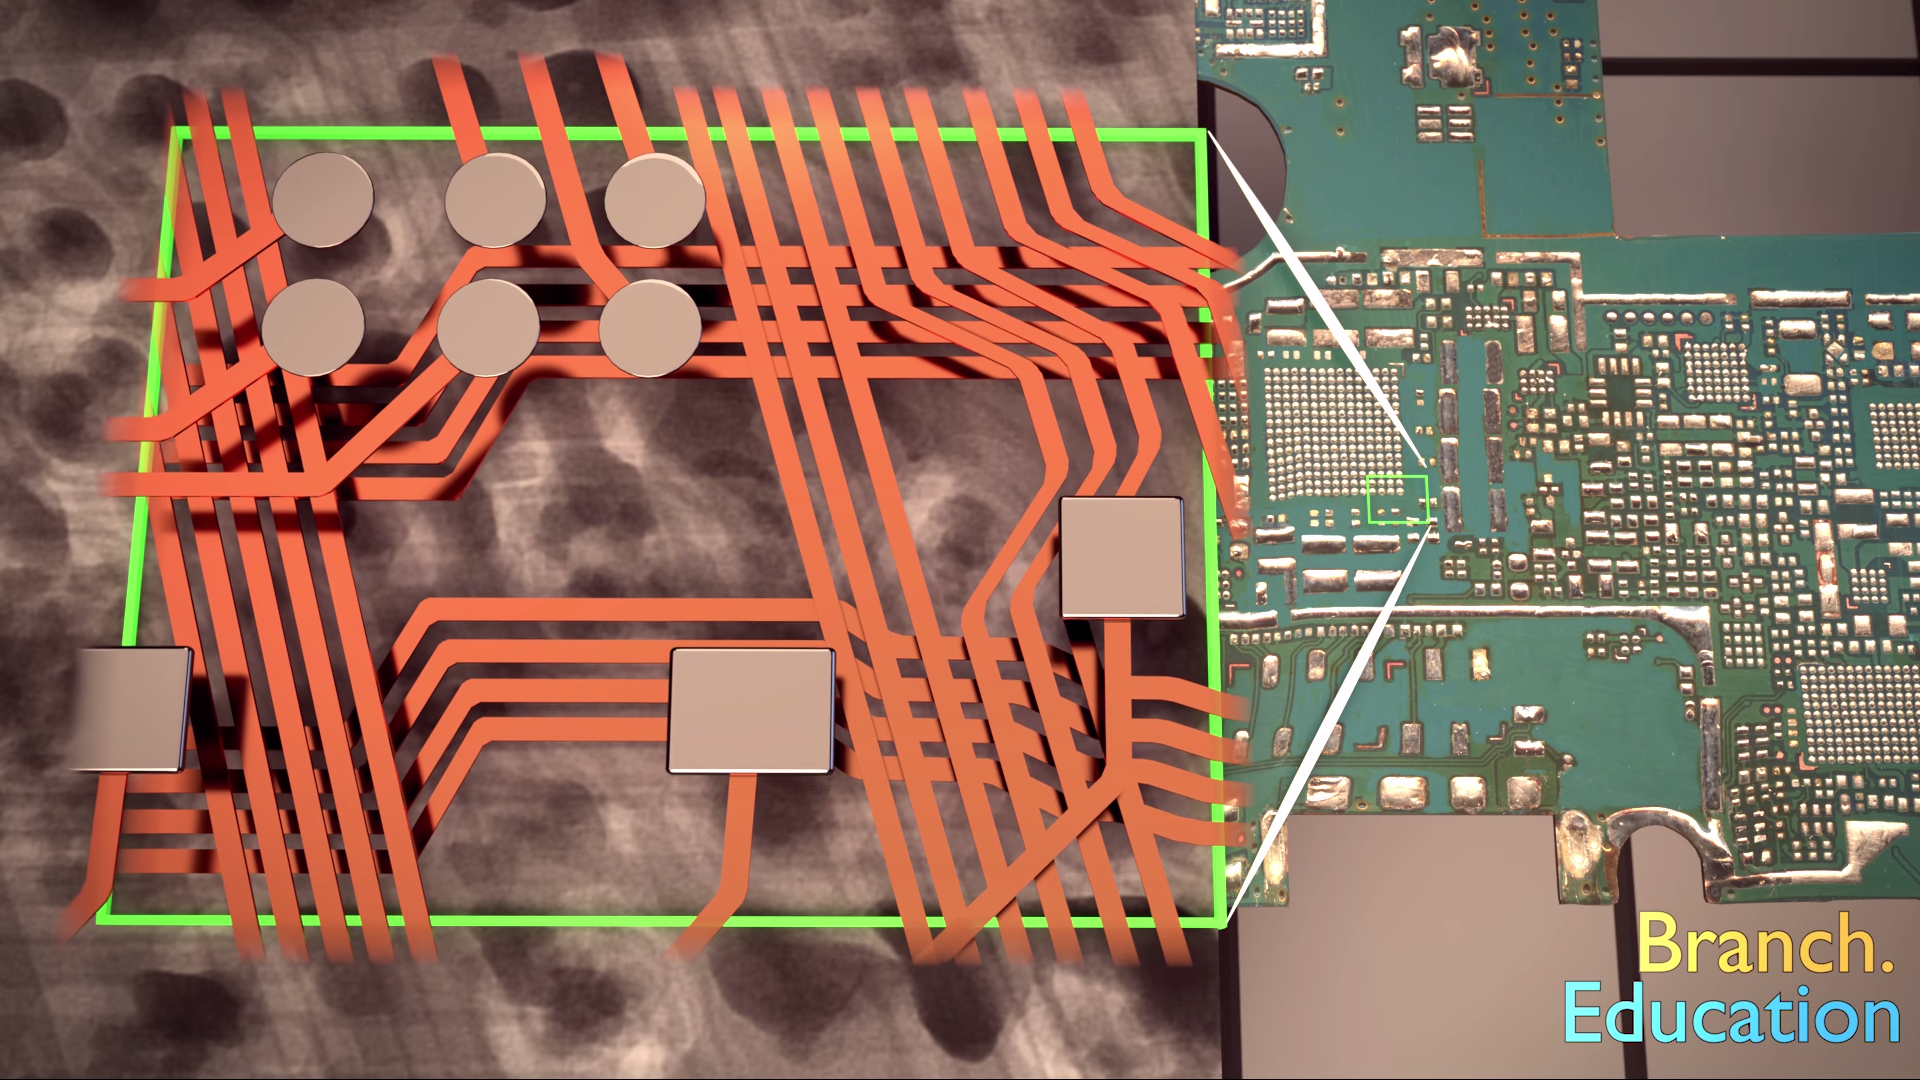 Journey Through The Workings Of A PCB | Hackaday